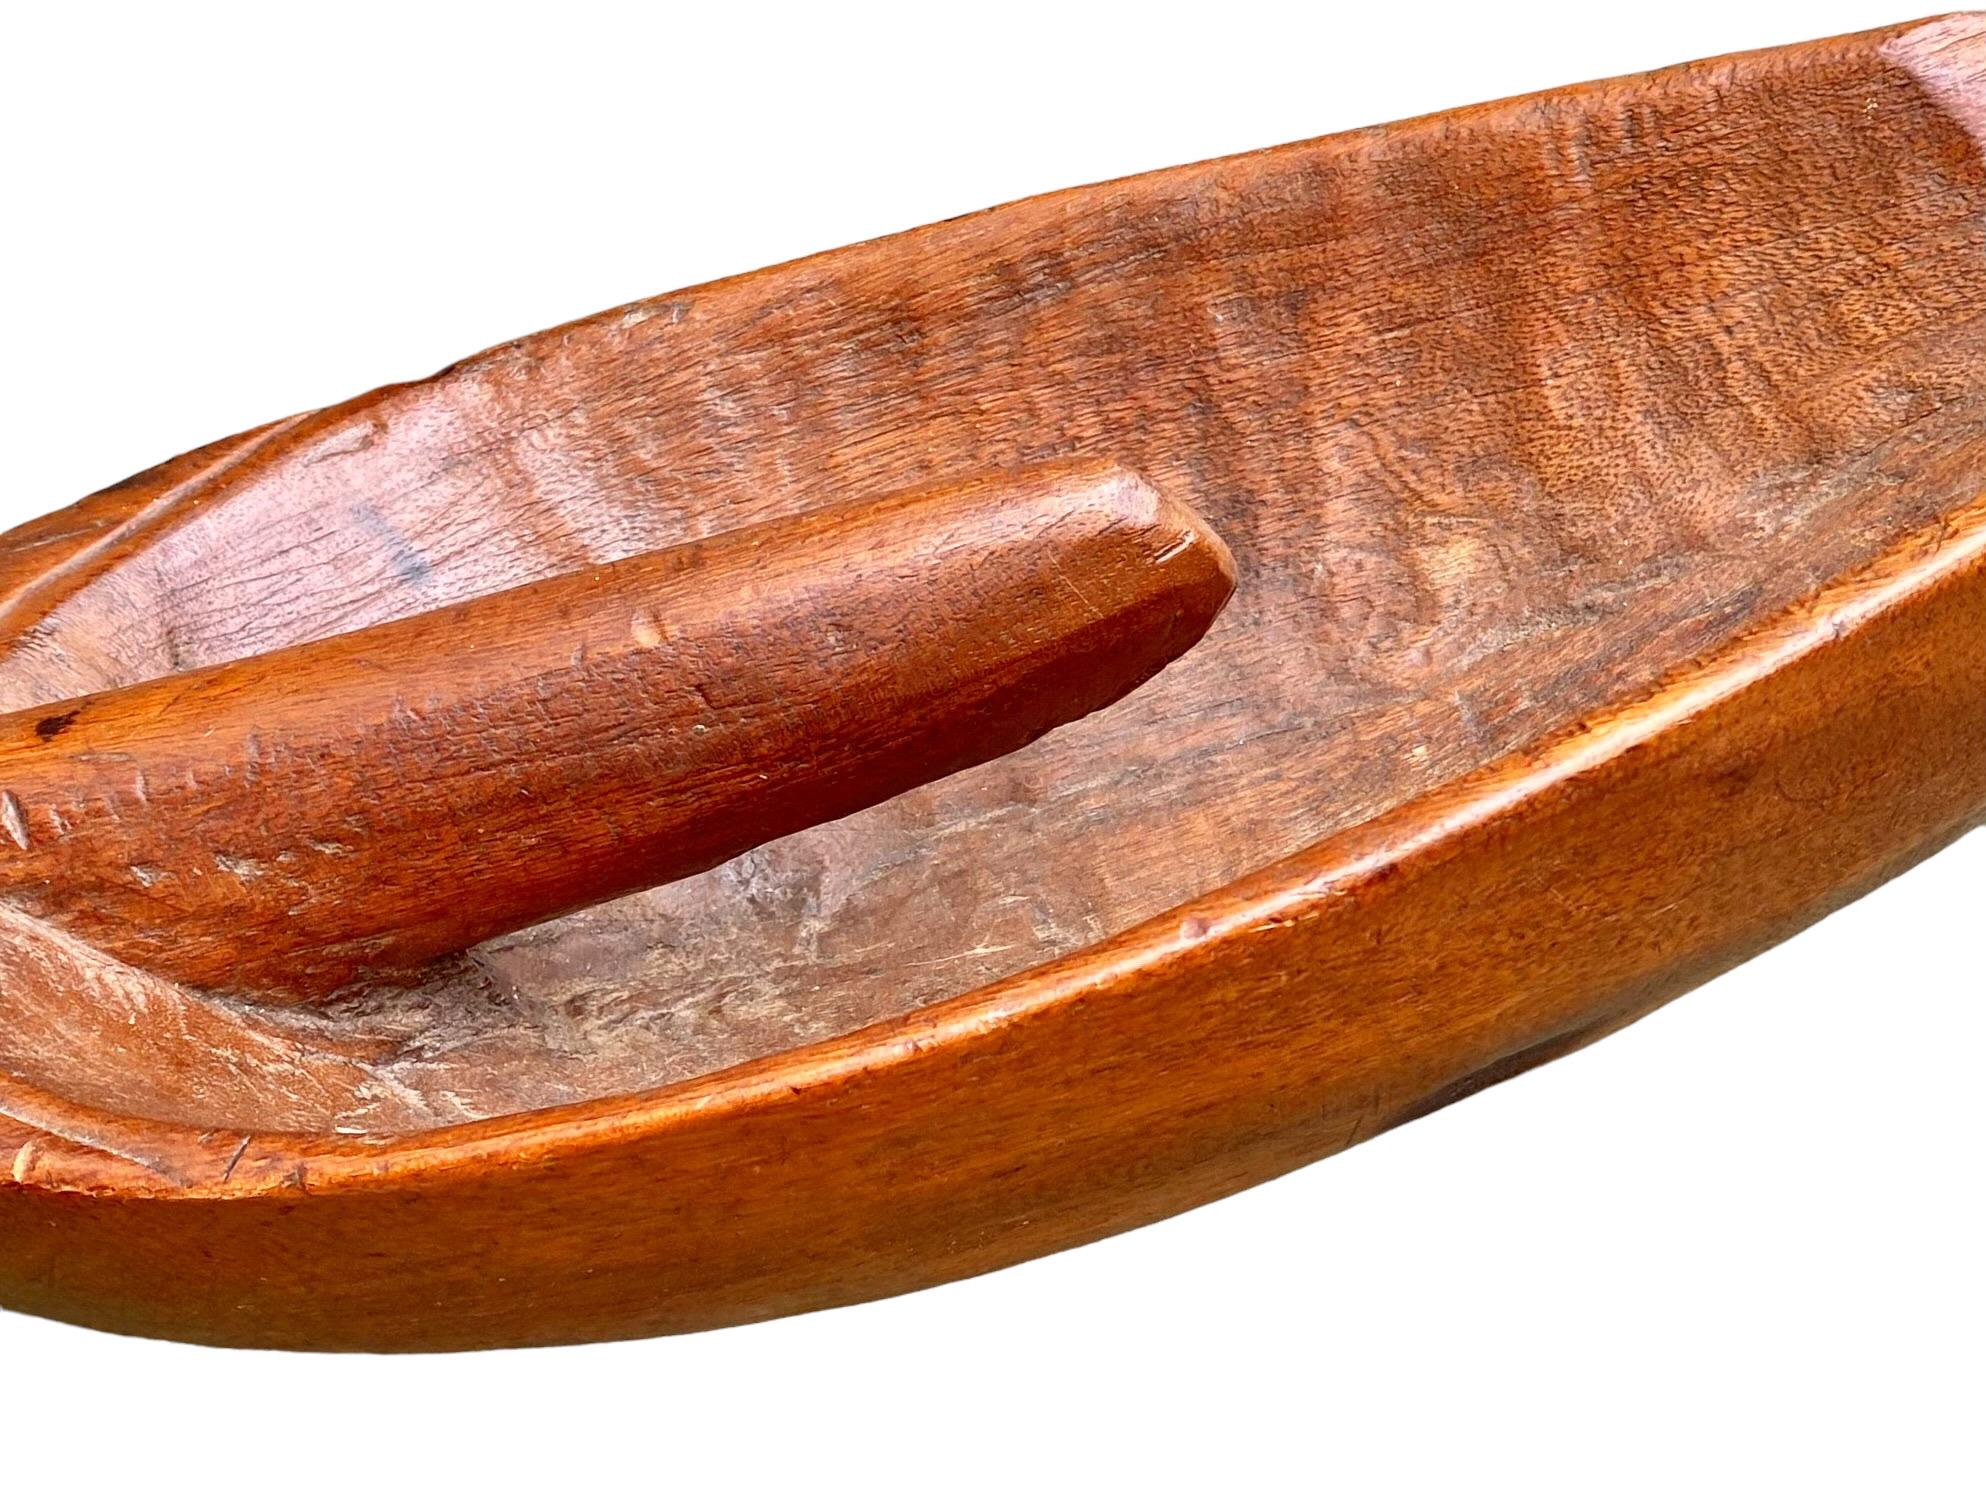 Full of character and rich in history, this antique French Provincial fruitwood grain scoop was once simply utilitarian, used to shovel oats into sacks. This fruitwood scoop has a lovely warm oxidized brown finish and the hand carved texture of the